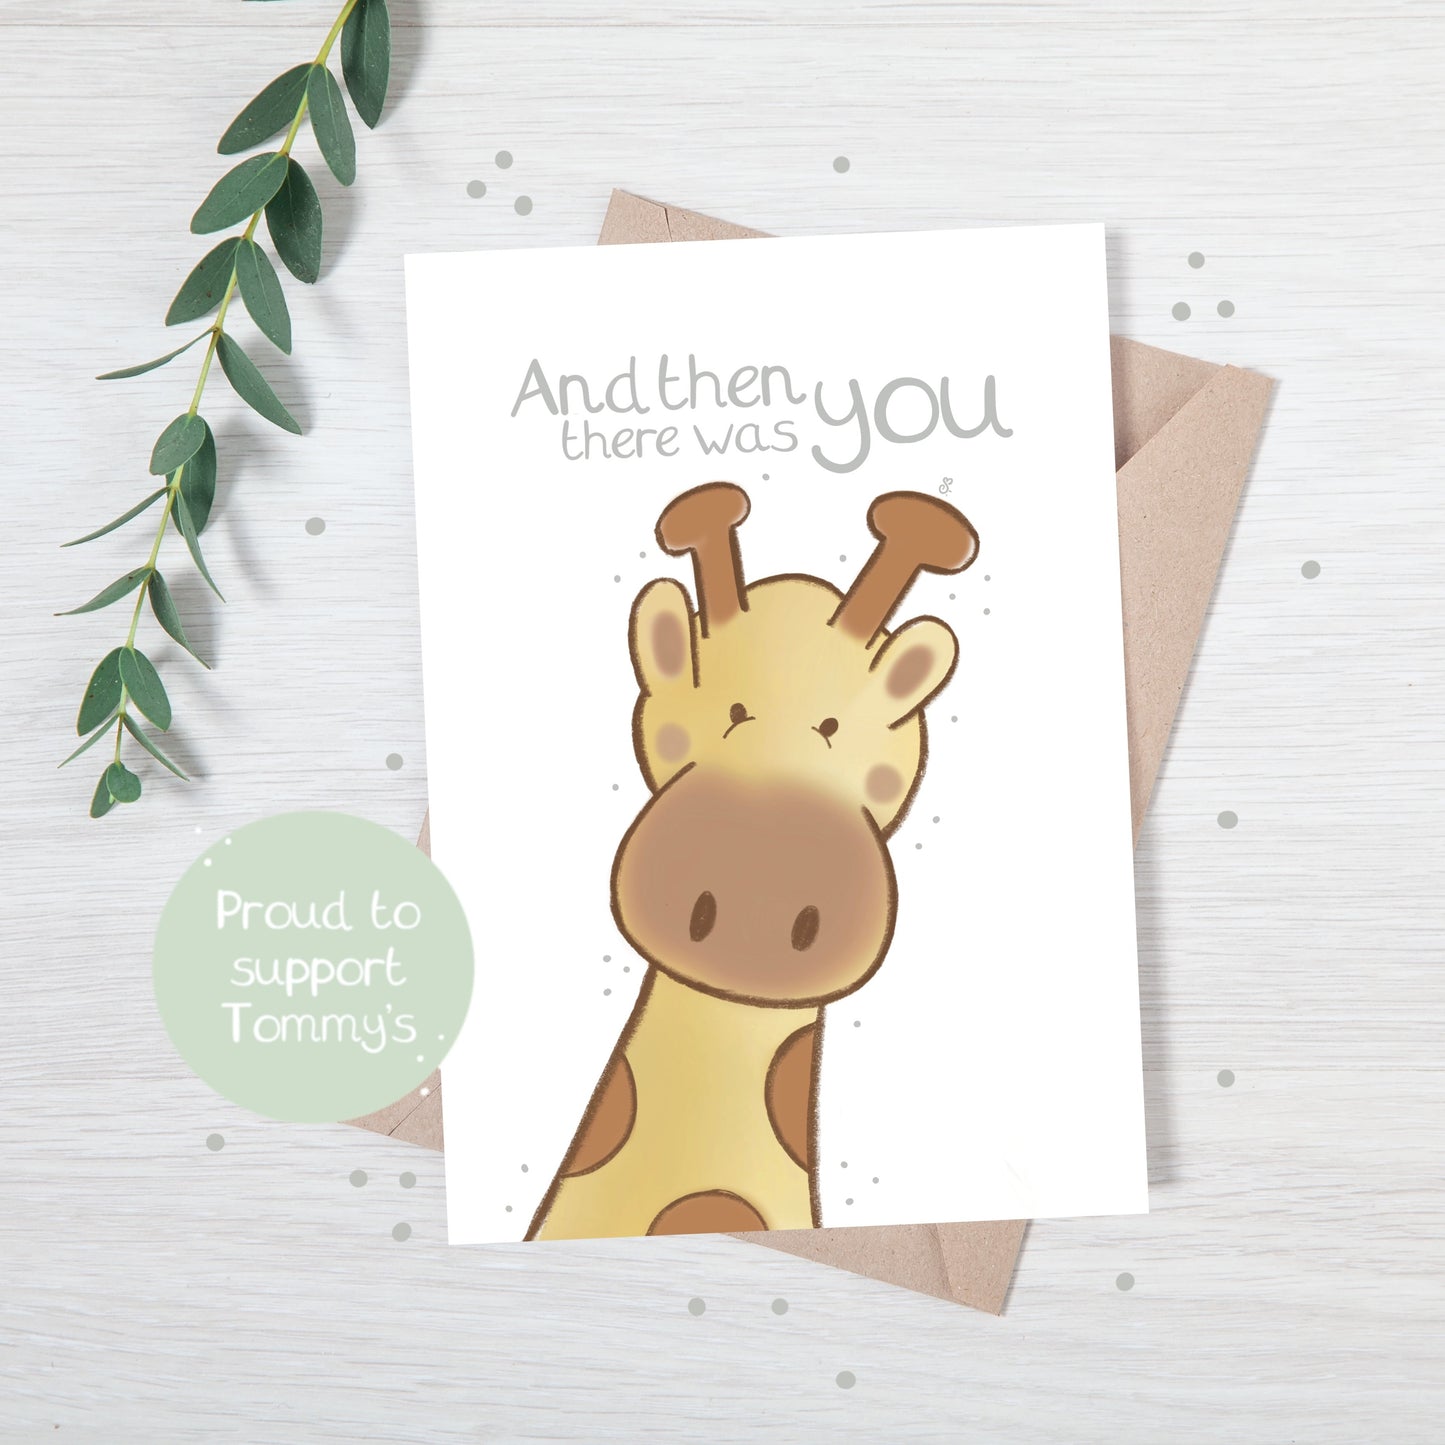 Handmade luxury new baby christening greetings card with a safari theme baby giraffe popping up from the bottom with the title &quote "and then there was you" on a white background, with a kraft envelope